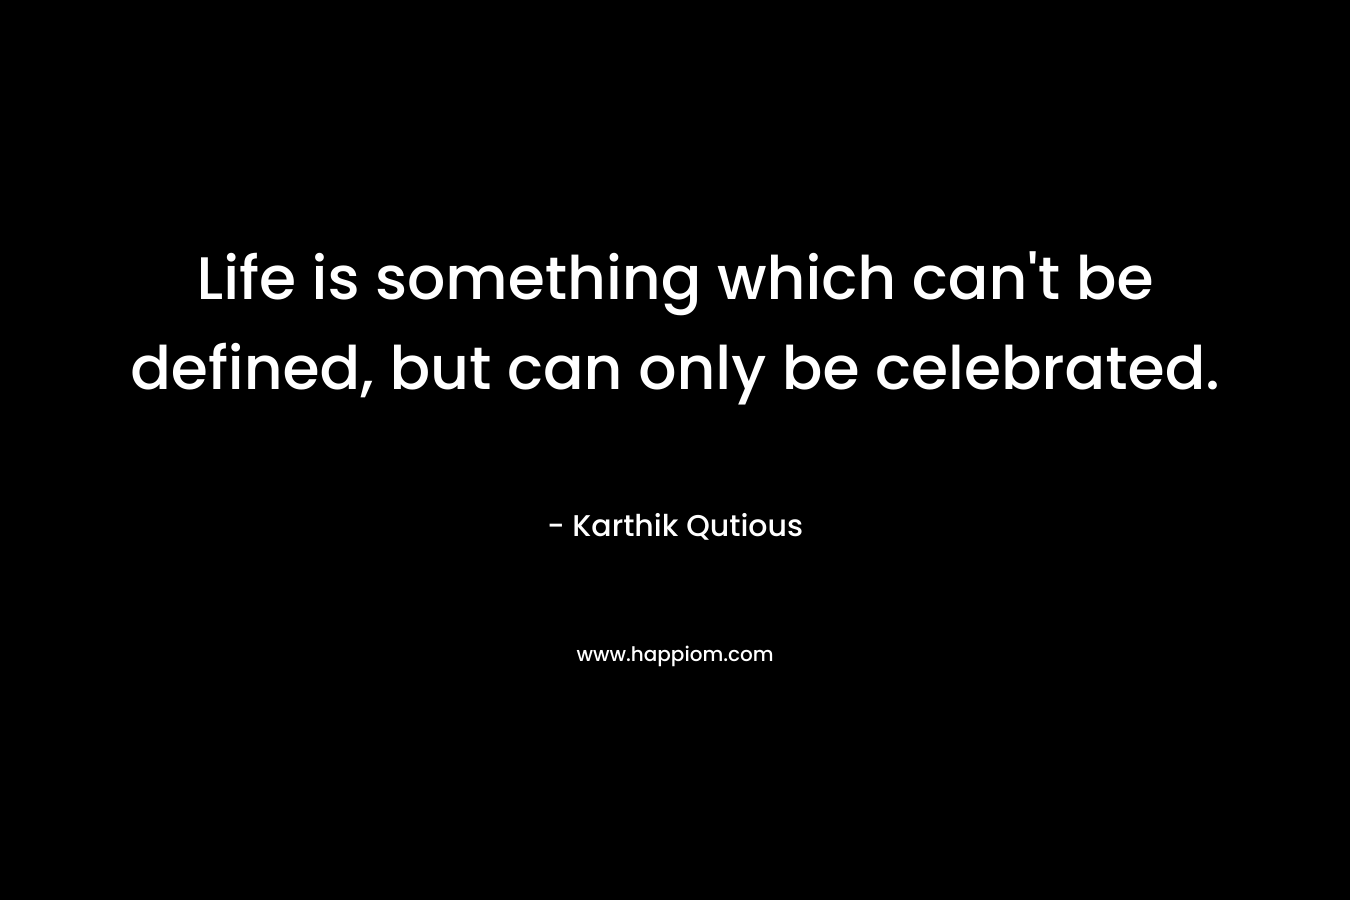 Life is something which can't be defined, but can only be celebrated.